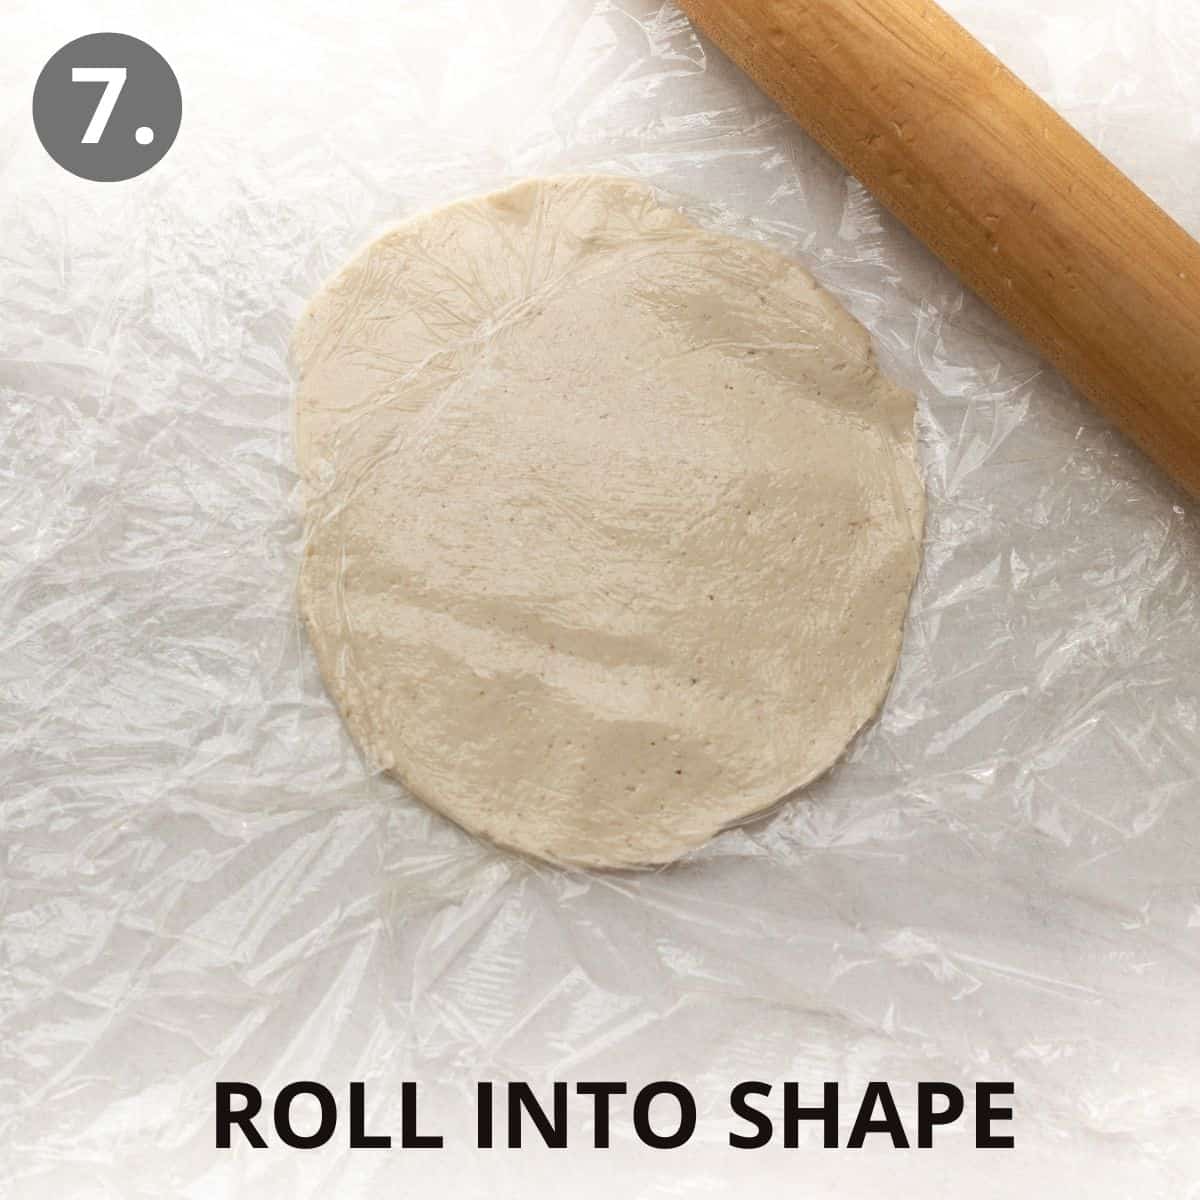 A piece of flatbread dough rolled out into a flat circle